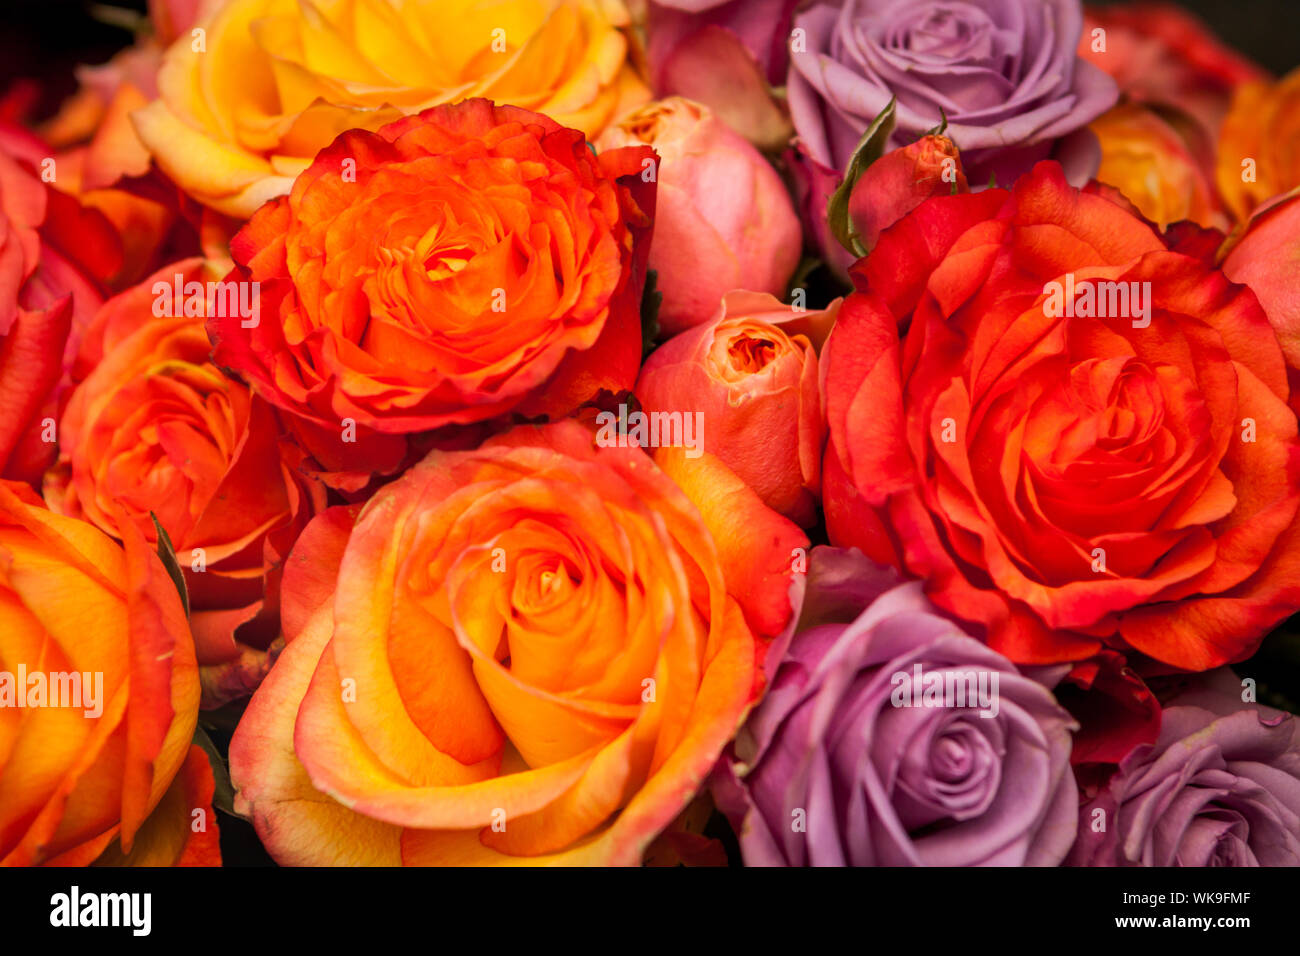 Bunches Of Colorful Fresh Roses In Red Orange And Lilac For Sale